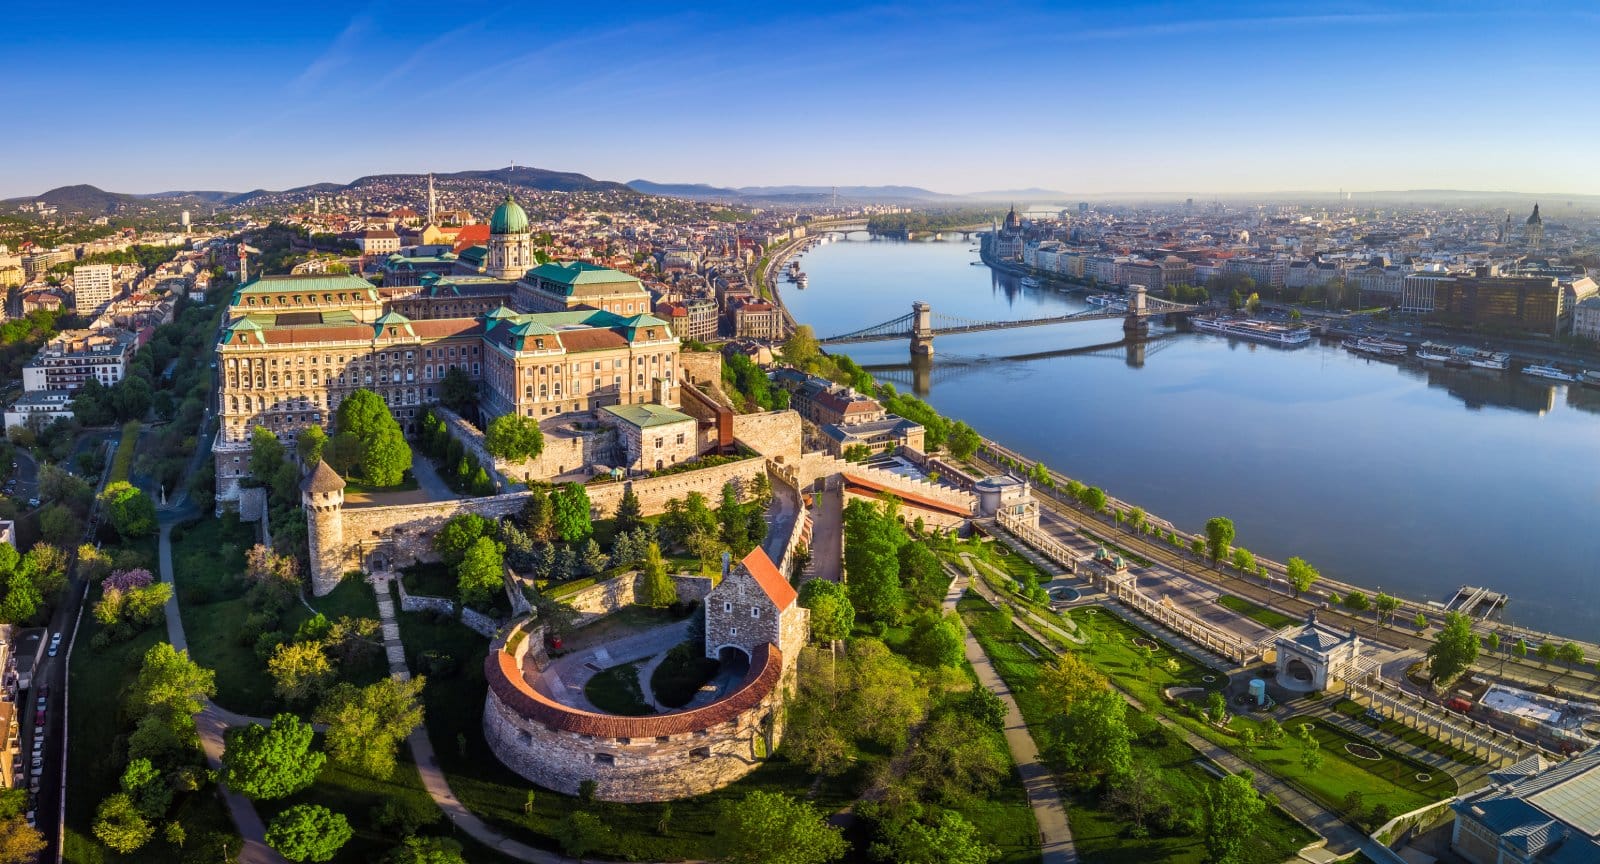 <p class="wp-caption-text">Image Credit: Shutterstock / ZGPhotography</p>  <p>Budapest is famous for its thermal baths, historic sites, and vibrant nightlife, all available at prices kind to your wallet.</p>